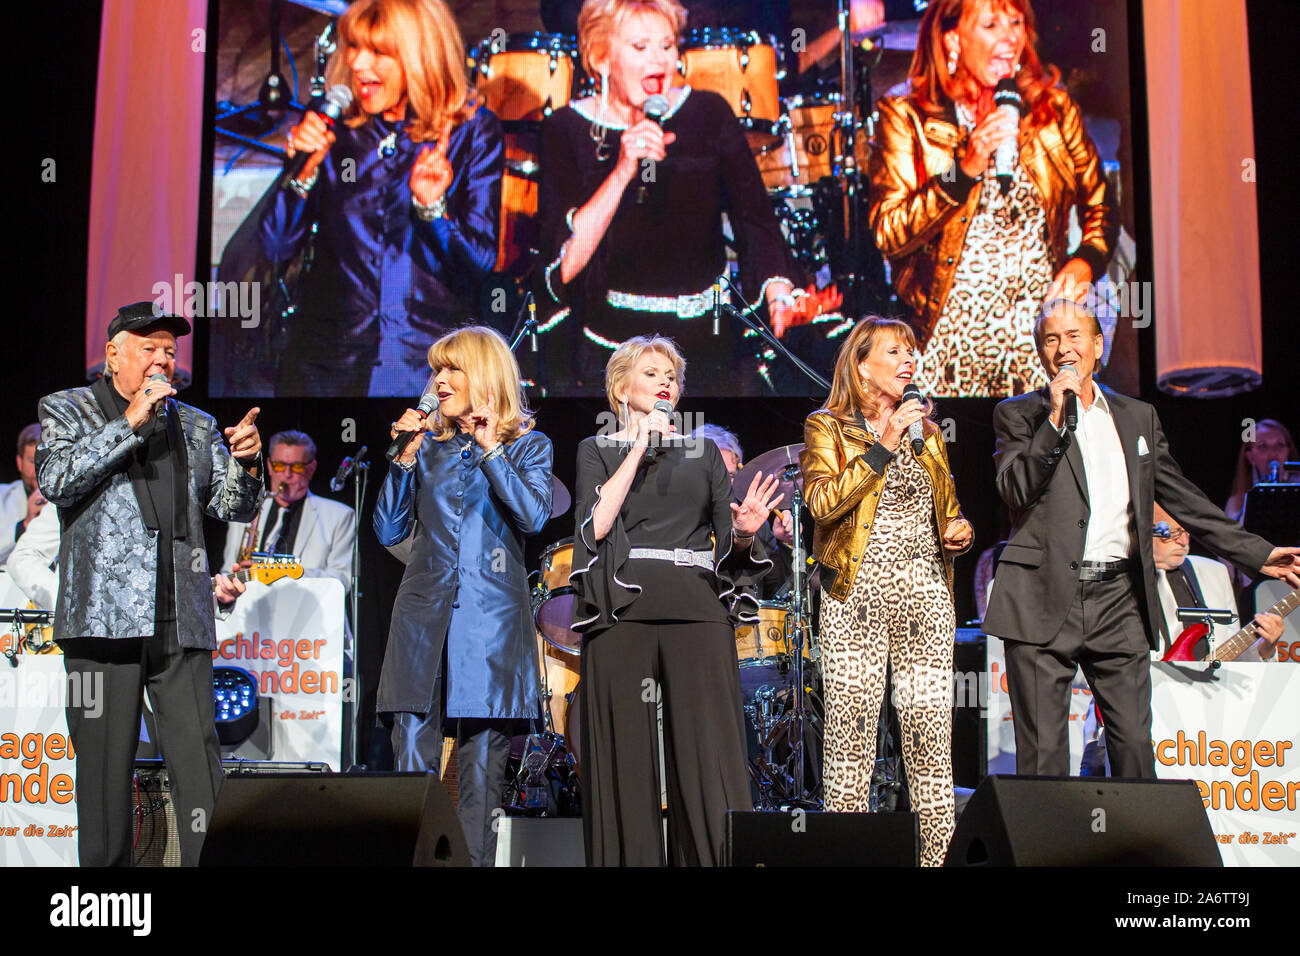 Graham Bonney, Lena Valaitis, Peggy March, Ireen Sheer and Michael Holm are performing at Schlager music show Schlagerlegenden, with schlager music stars of the 1960s and 1970s. At Stadthalle Wetzlar, Wetzlar, Germany, 27th Oct, 2019. Credit: Christian Lademann Stock Photo